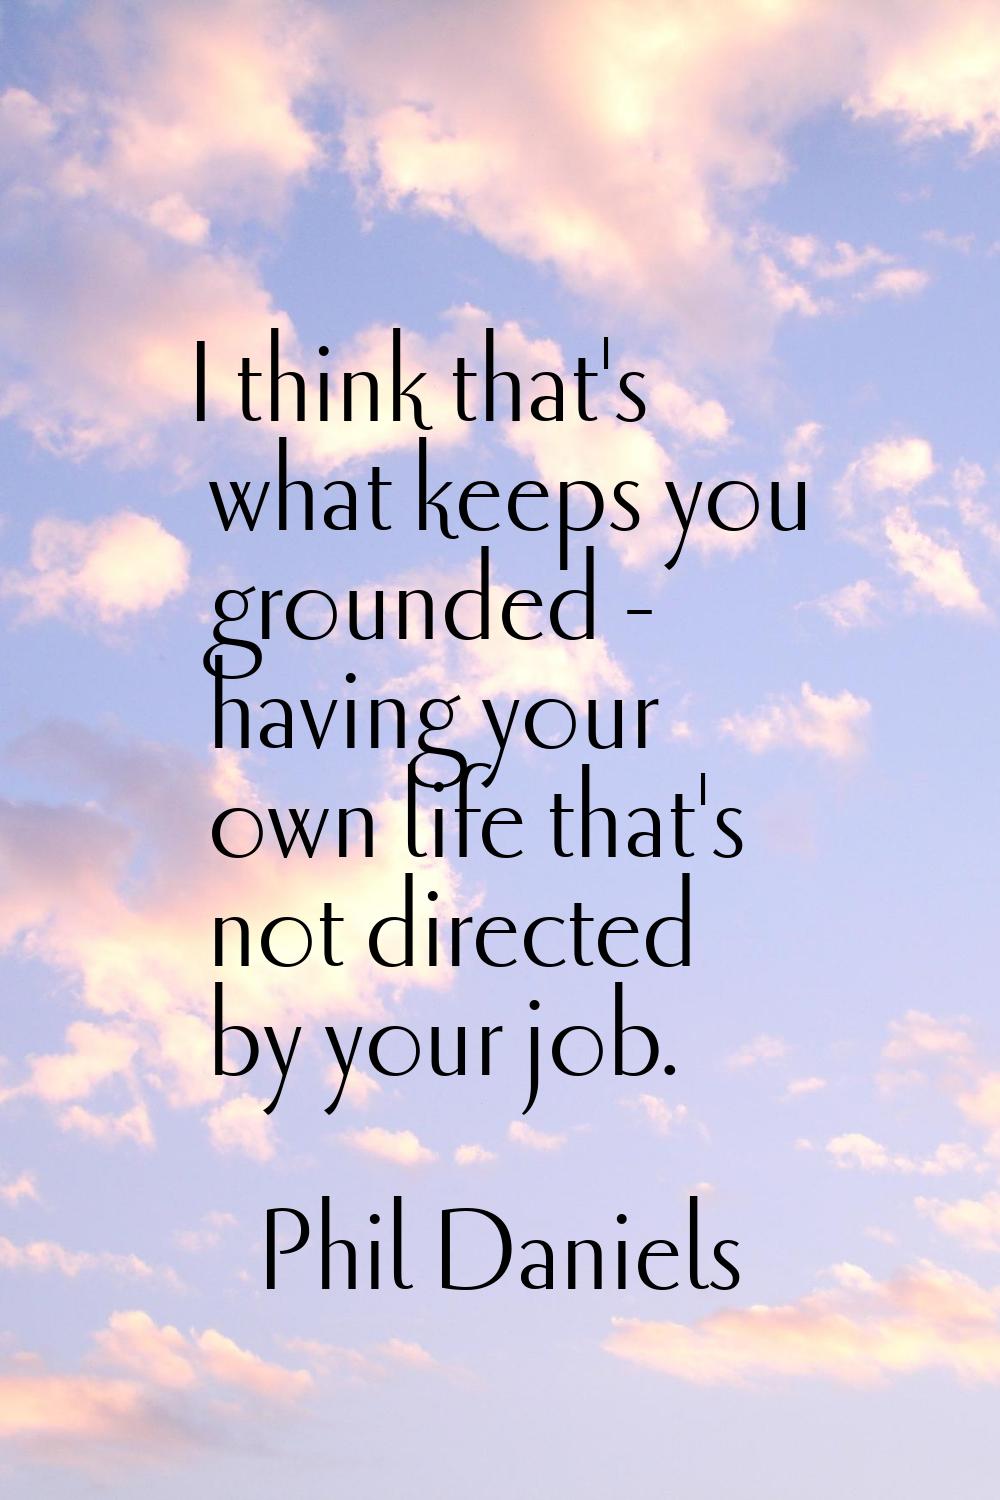 I think that's what keeps you grounded - having your own life that's not directed by your job.